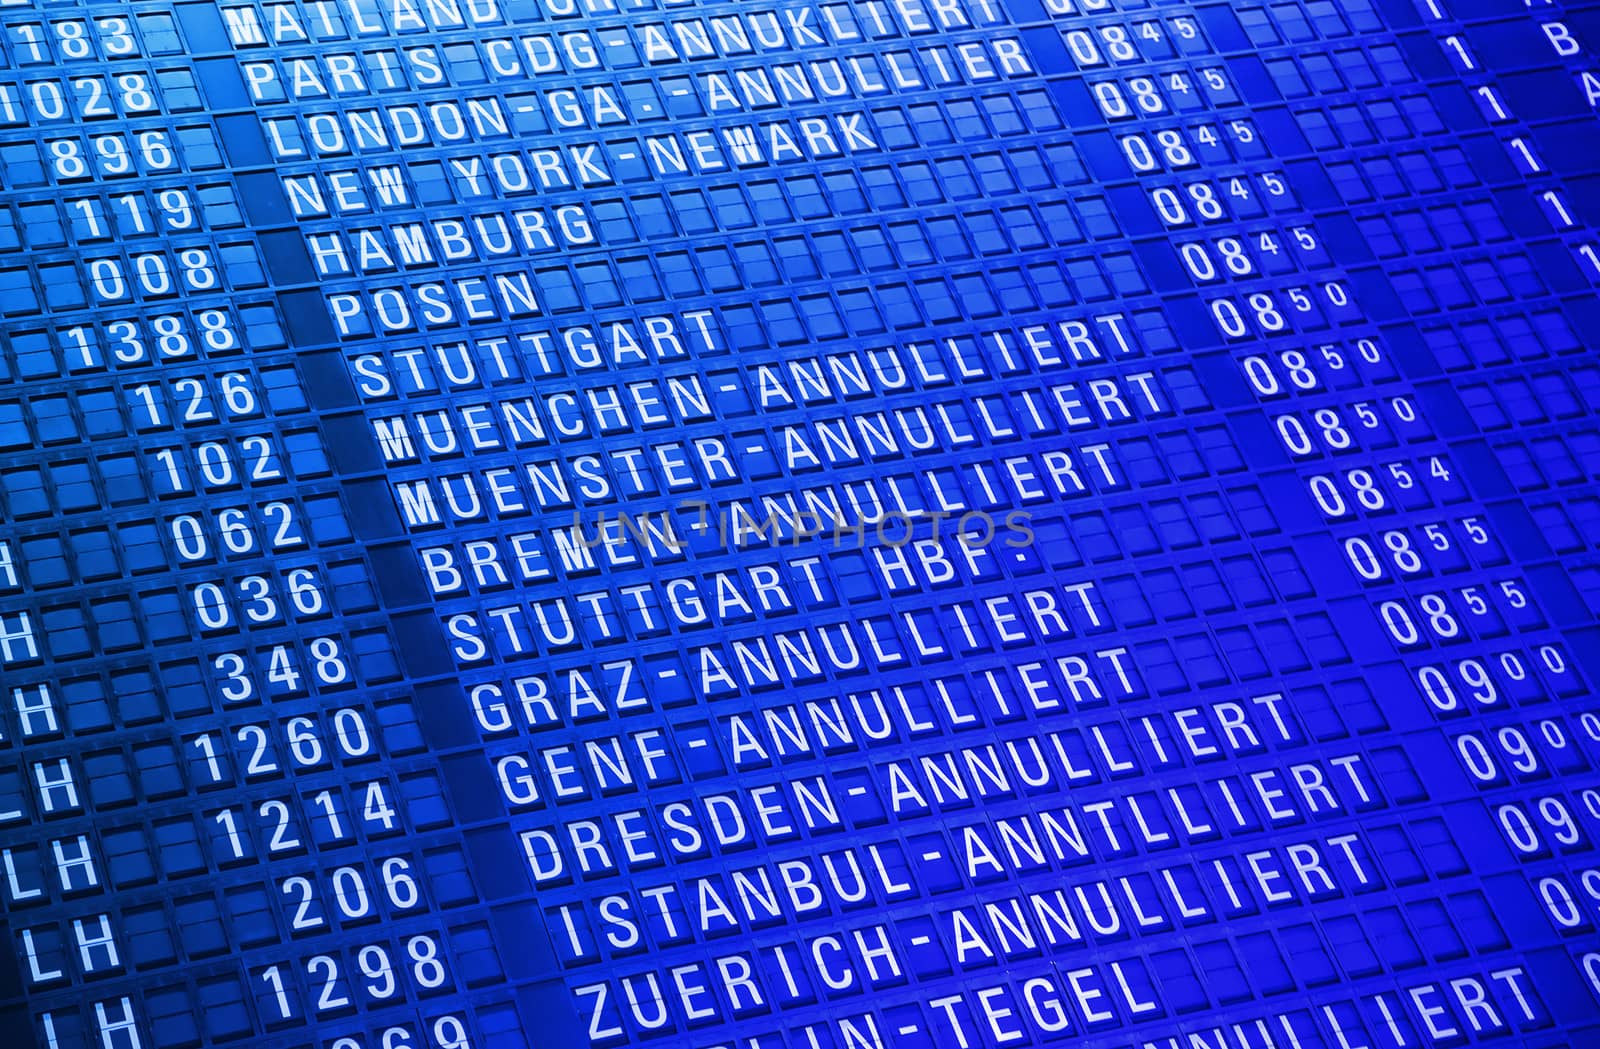 Airport timeboard by swisshippo